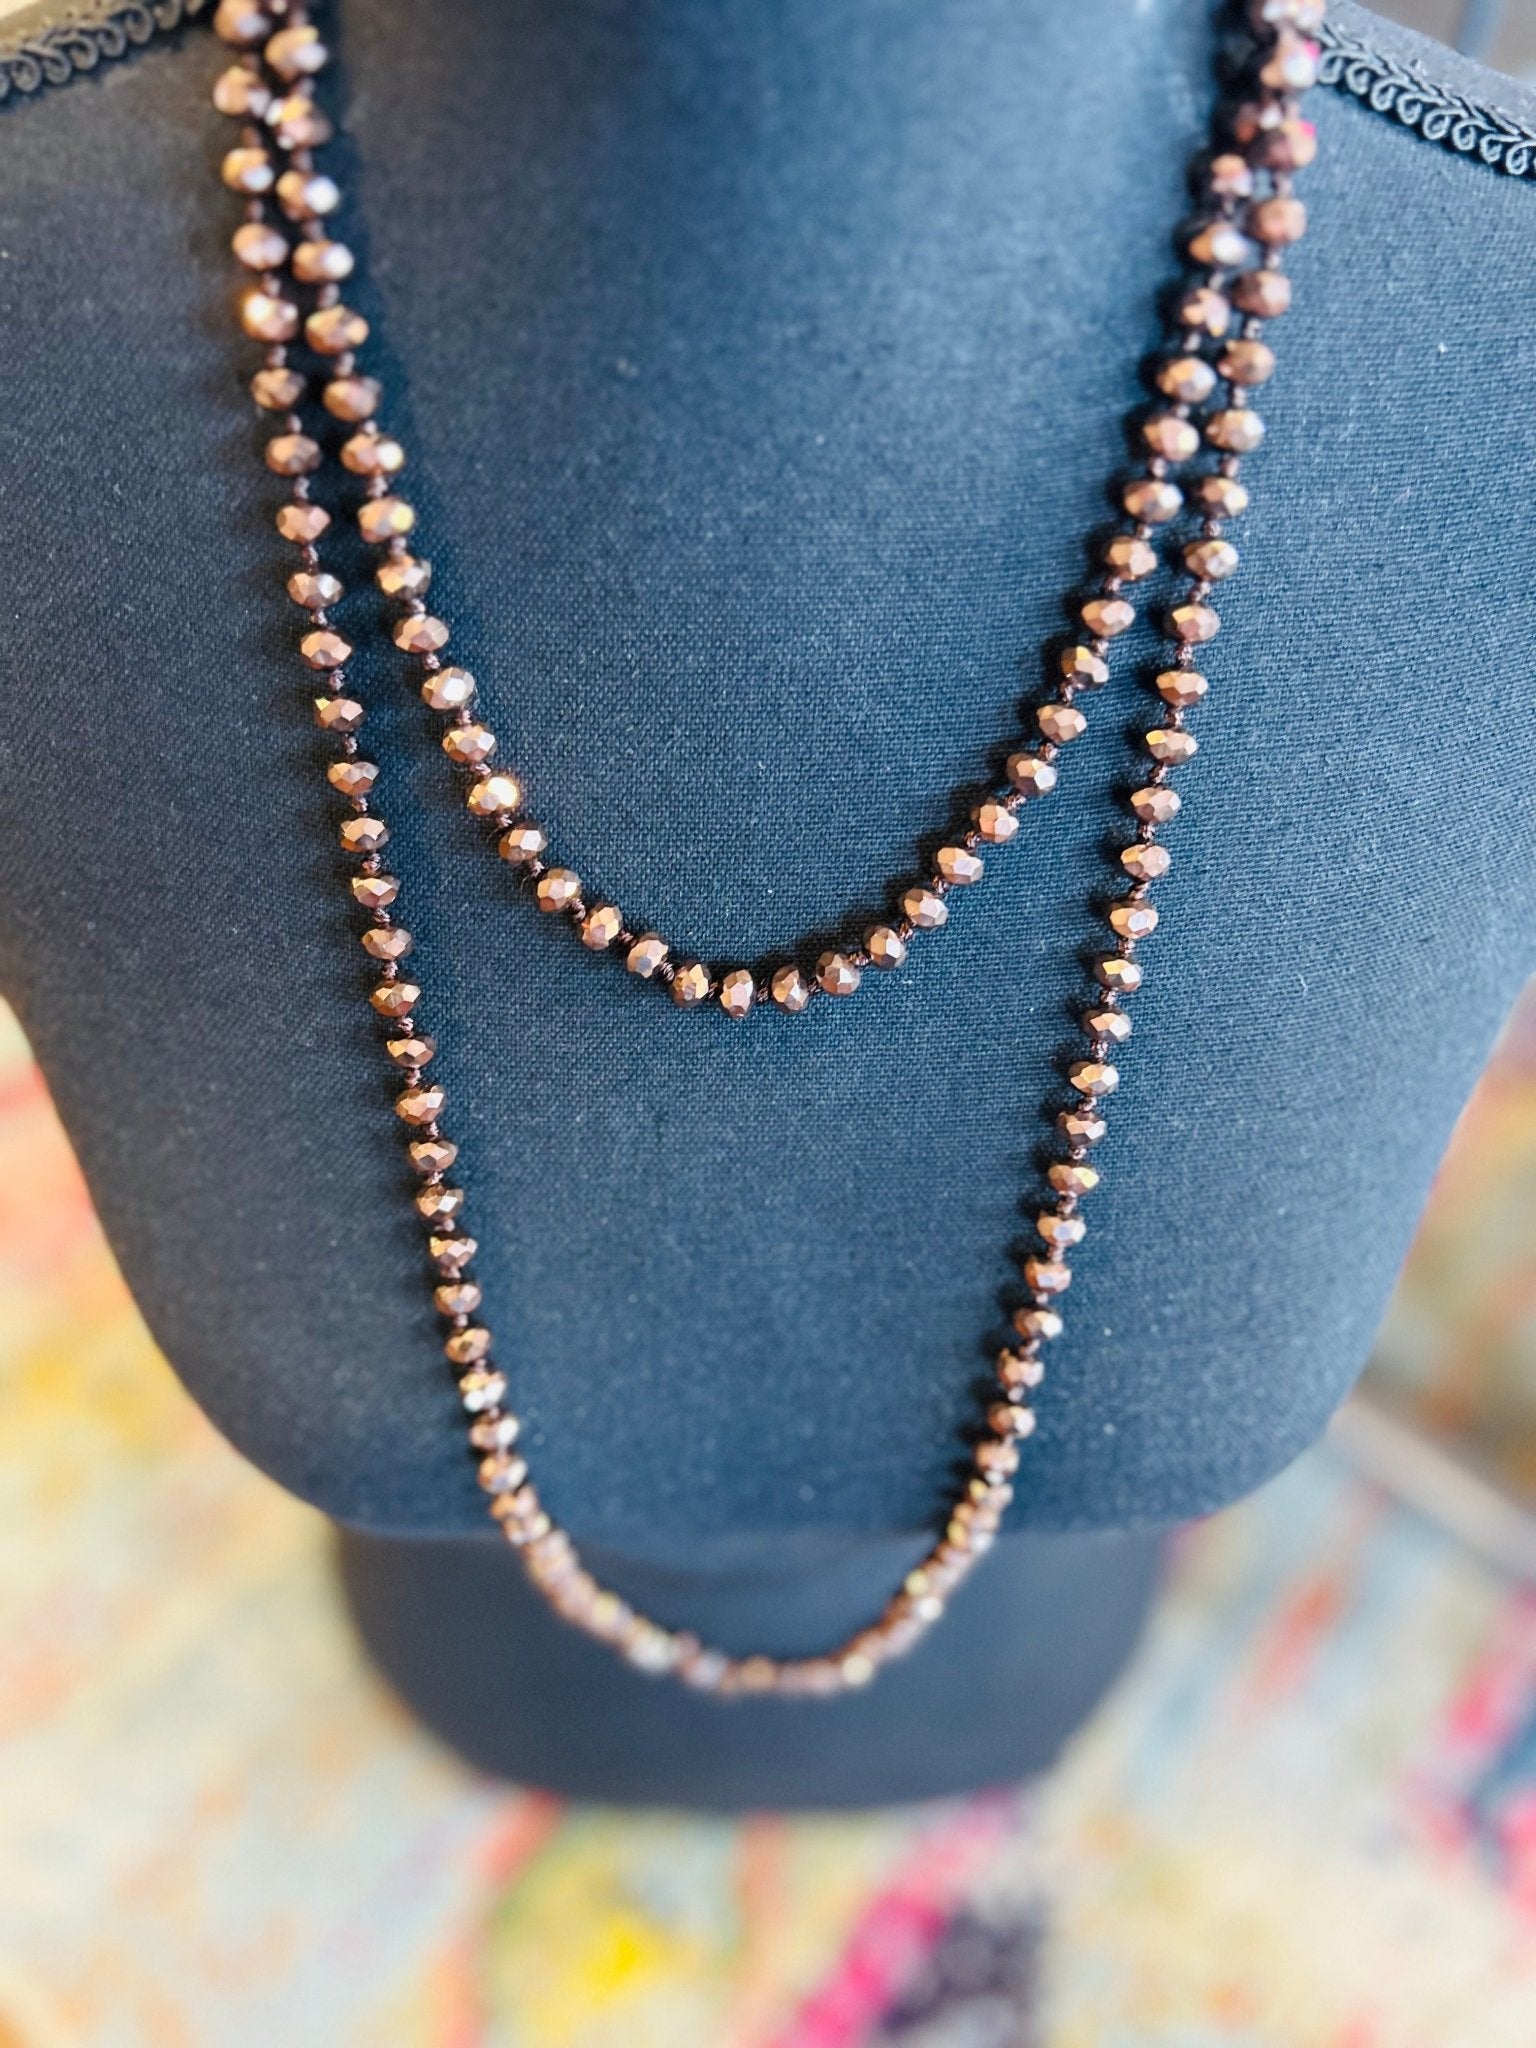 Long Beaded Necklace - Hey Heifer Boutique